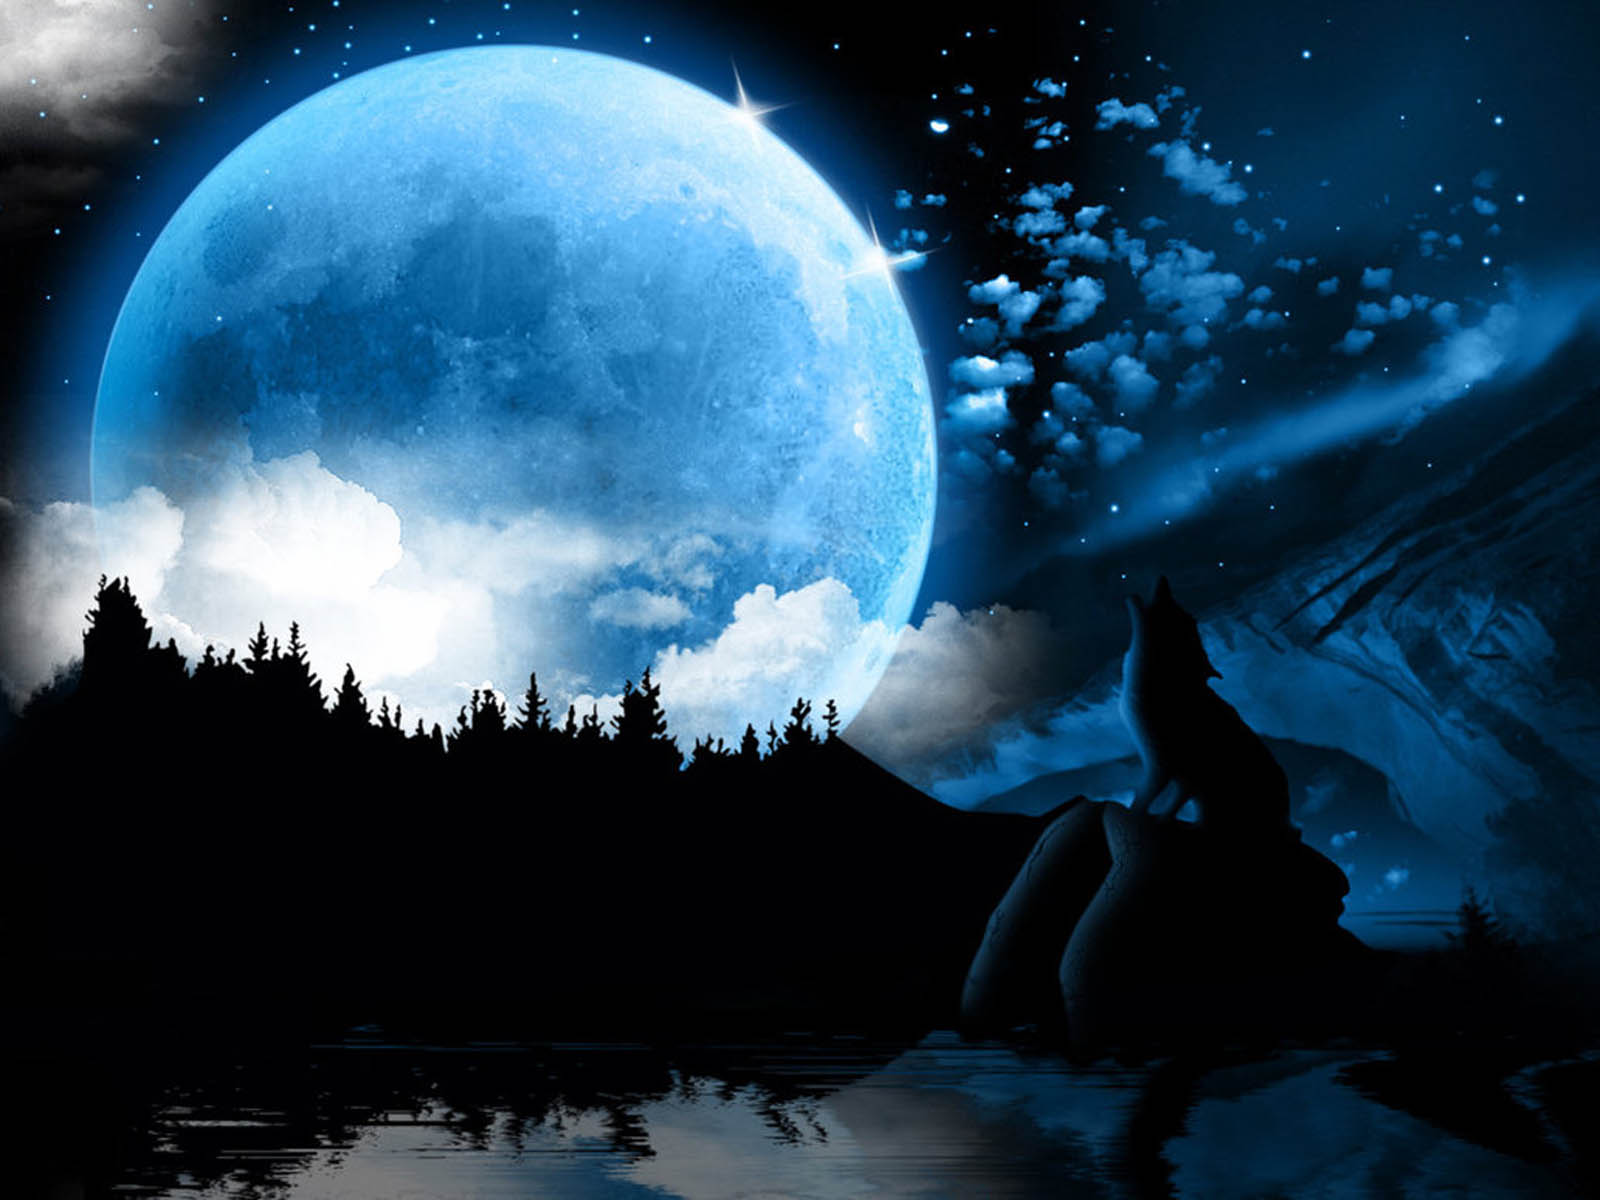 Free Download Moon Fantasy Wallpapers Backgrounds Paos Images And Pictures 1600x10 For Your Desktop Mobile Tablet Explore 48 Mythical Wallpaper Mythical Creatures Wallpaper Greek Mythology Wallpapers Cyclops Wallpaper